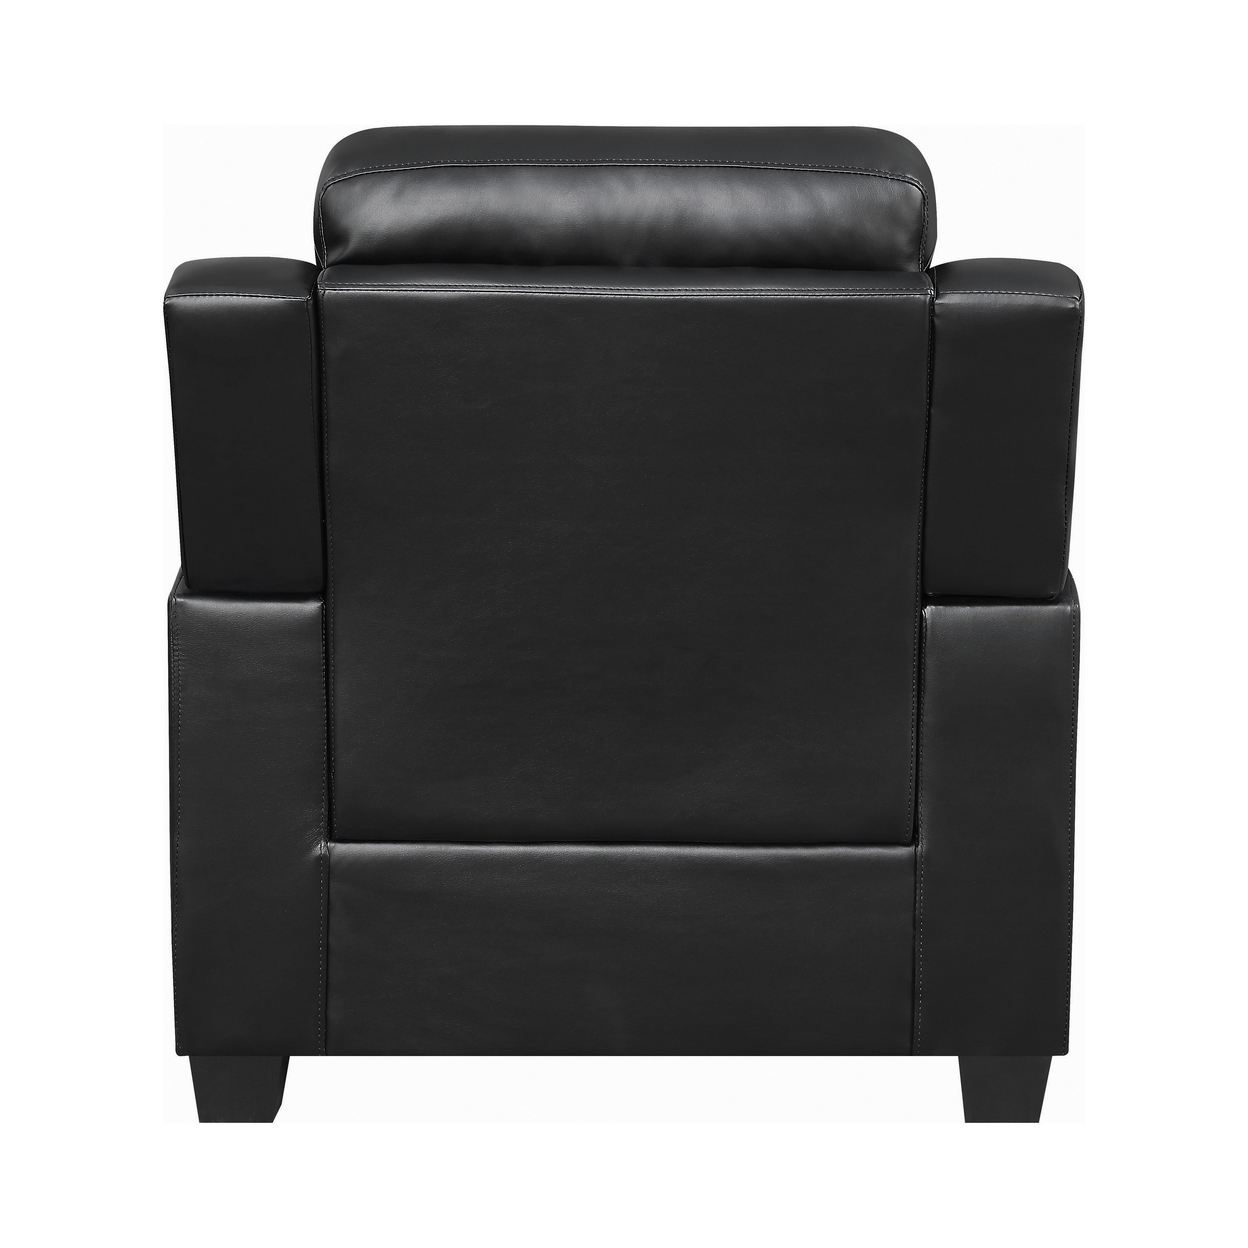 Finley Tufted Upholstered Chair Black - image 3 of 5